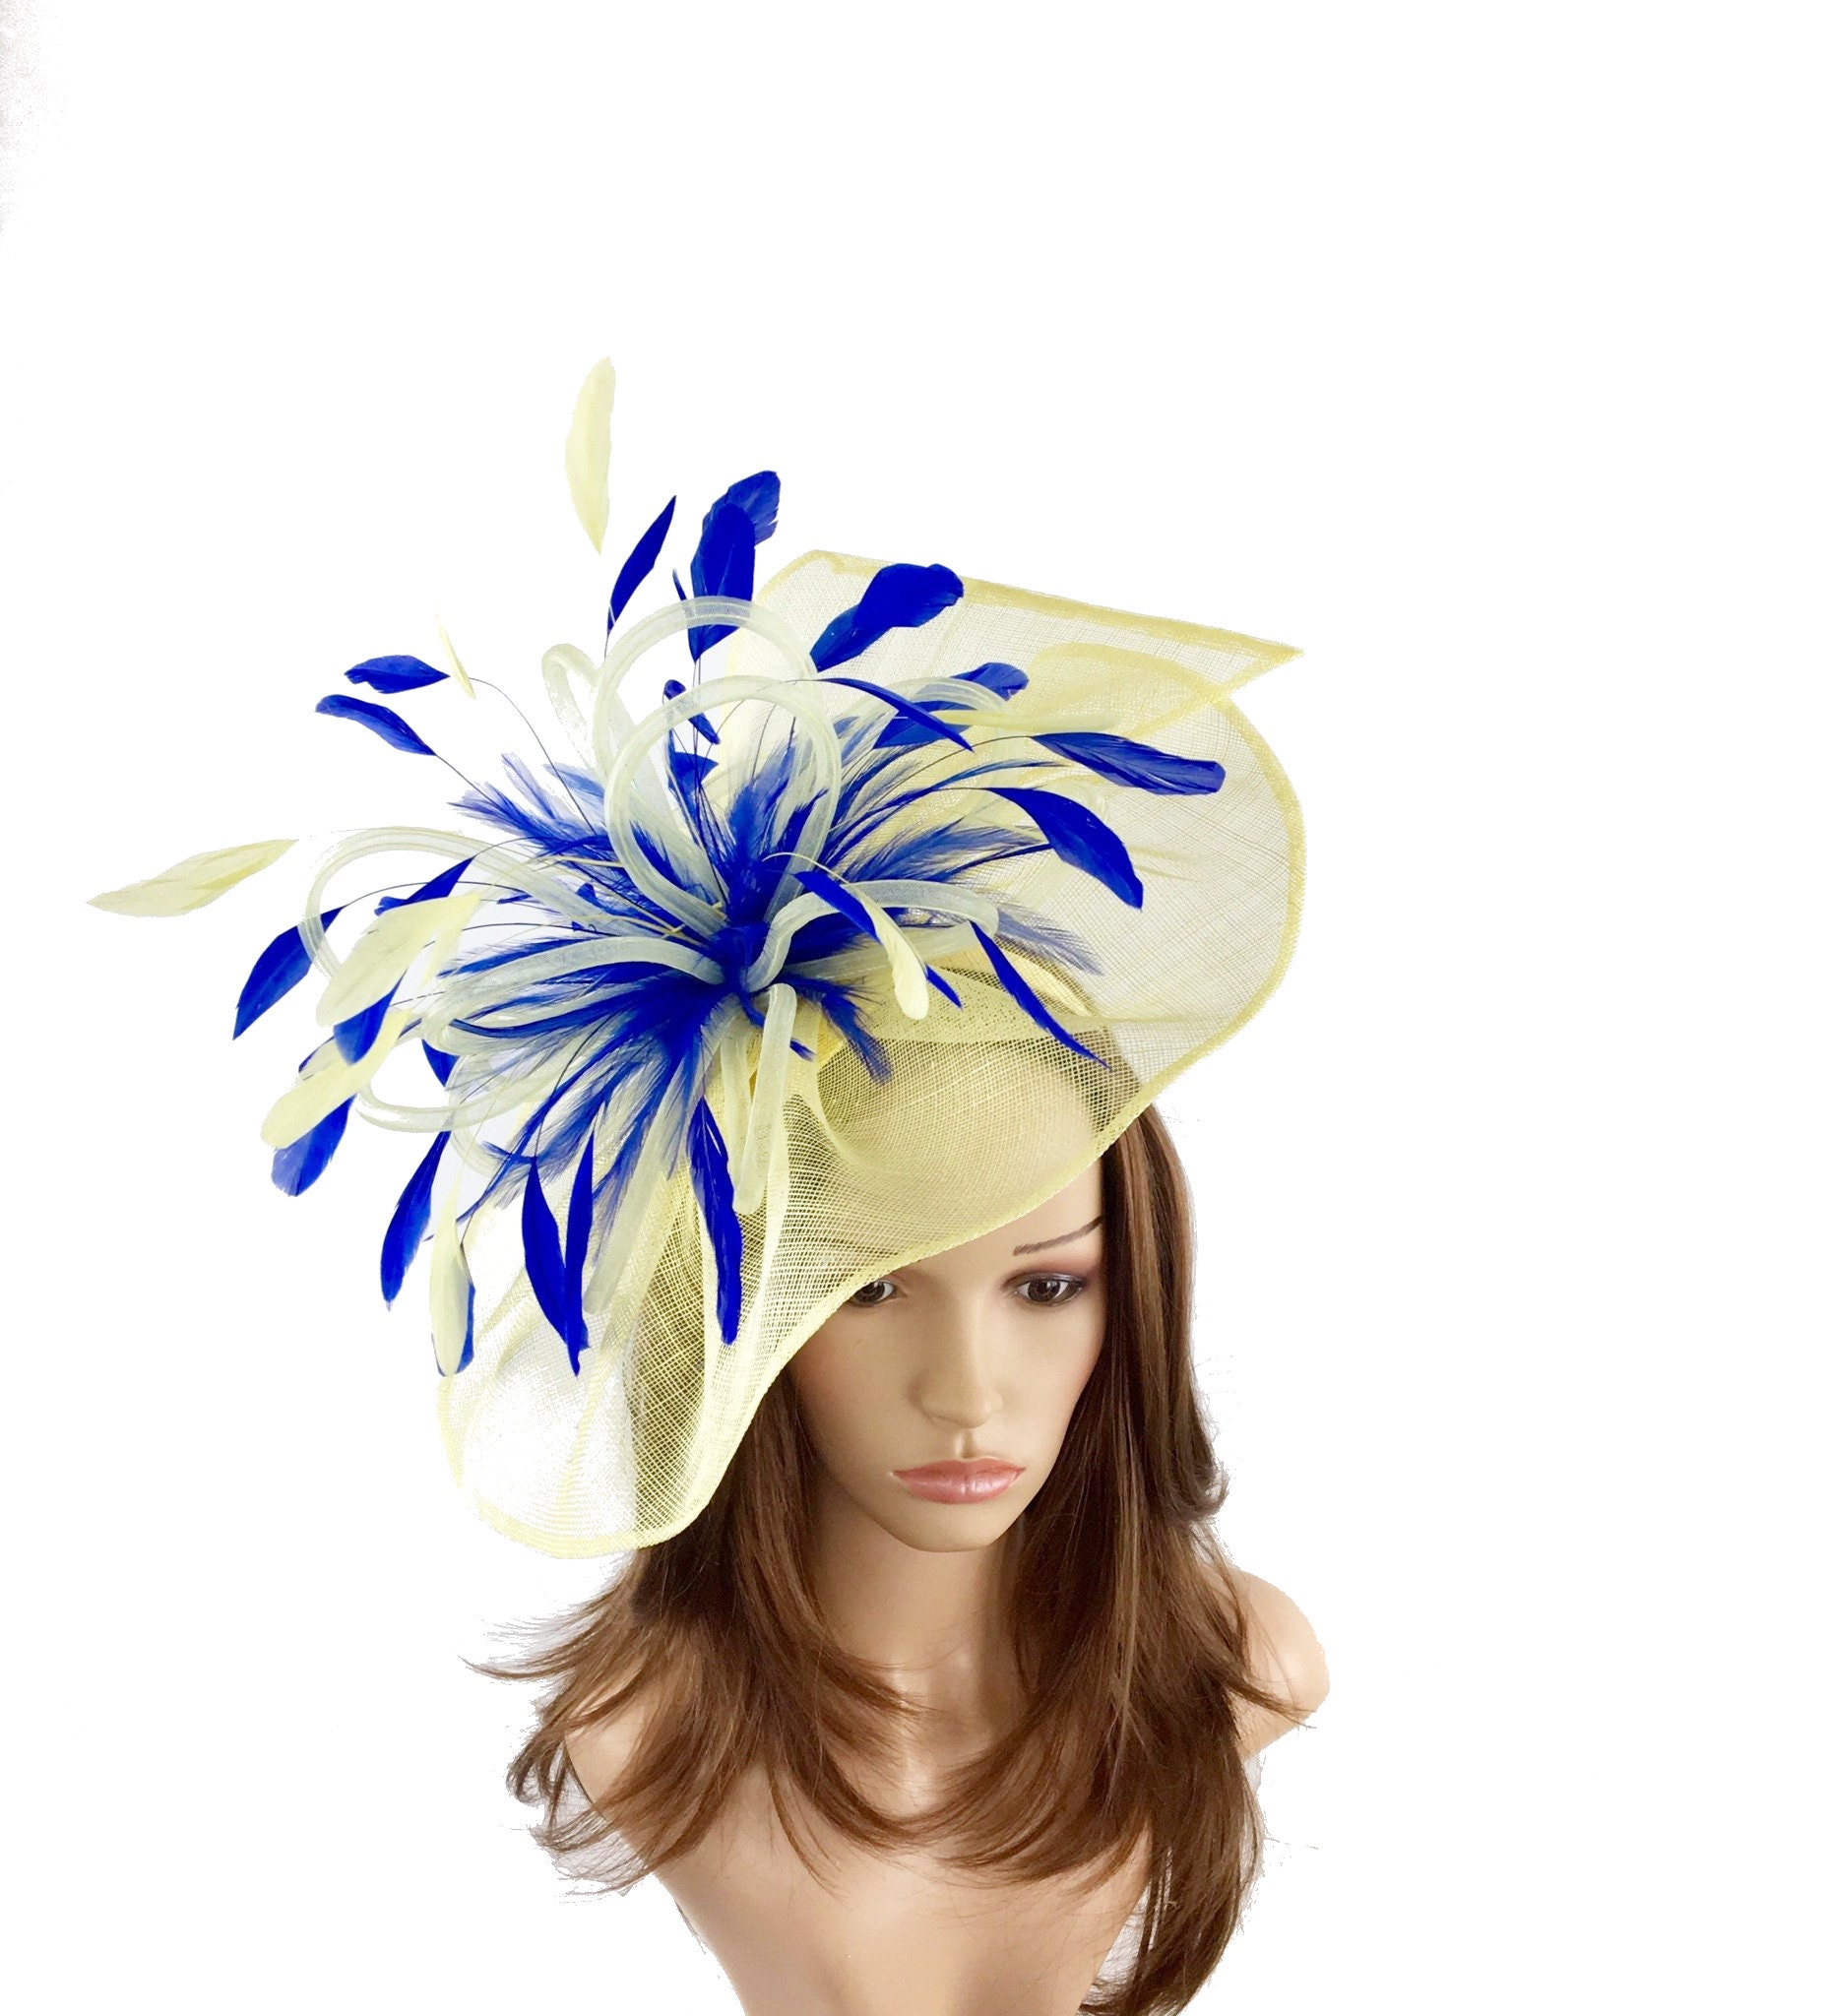 Cream Races/ Wedding Fascinator Hat/any satin/highlight feather colour 